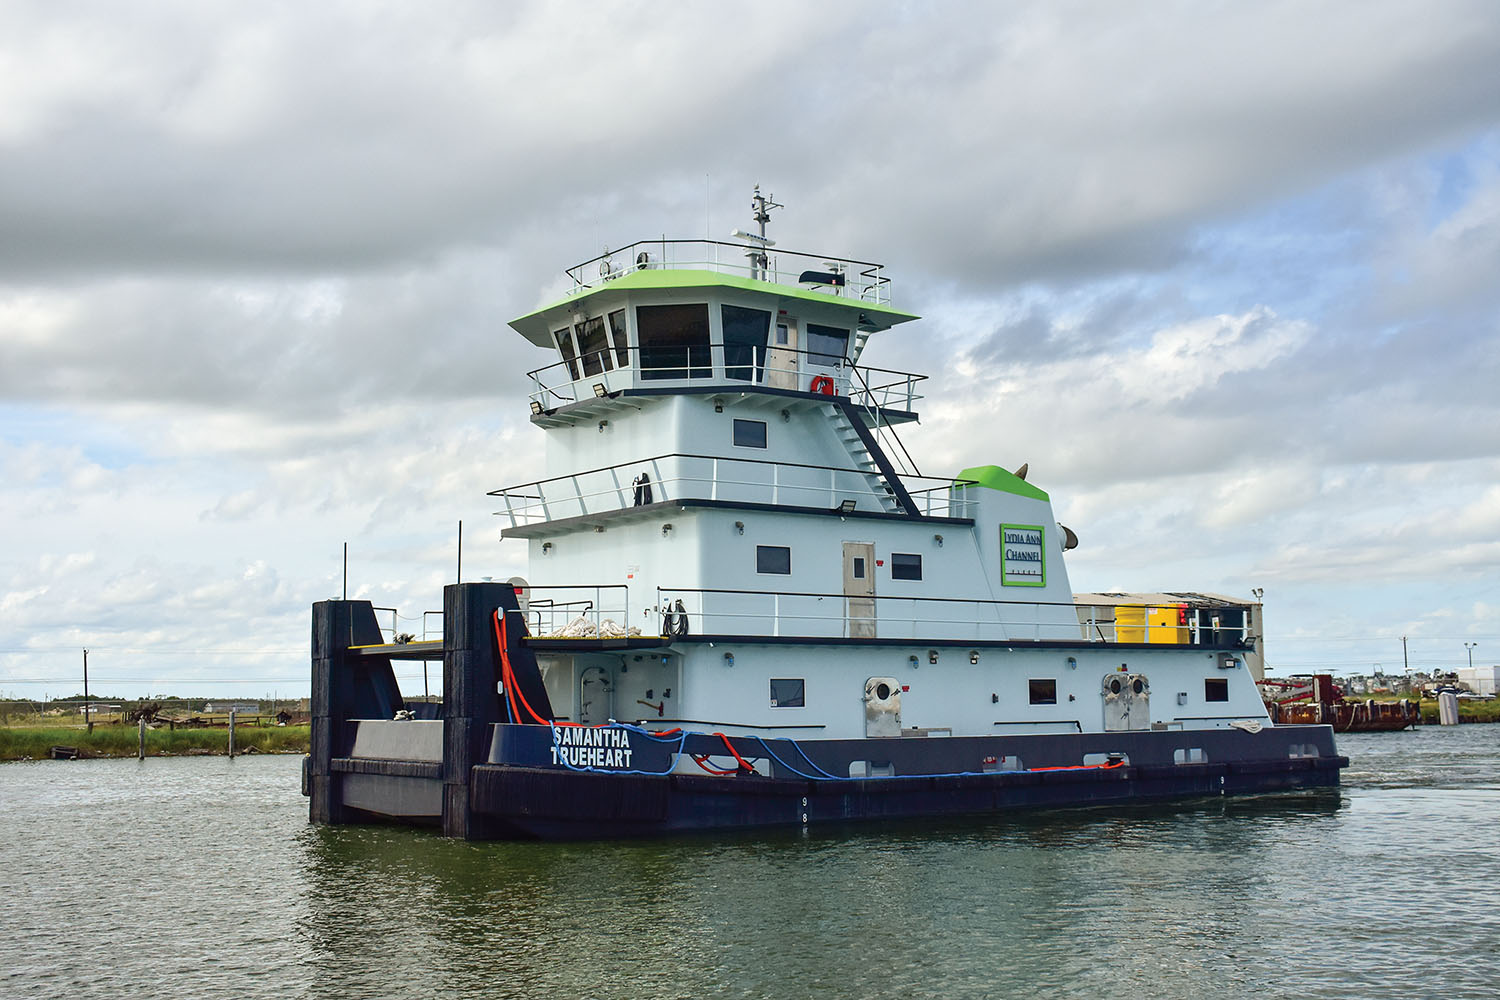 The mv. Samantha Trueheart was designed and built by Diversified Marine. (photo by Tracy Adams)